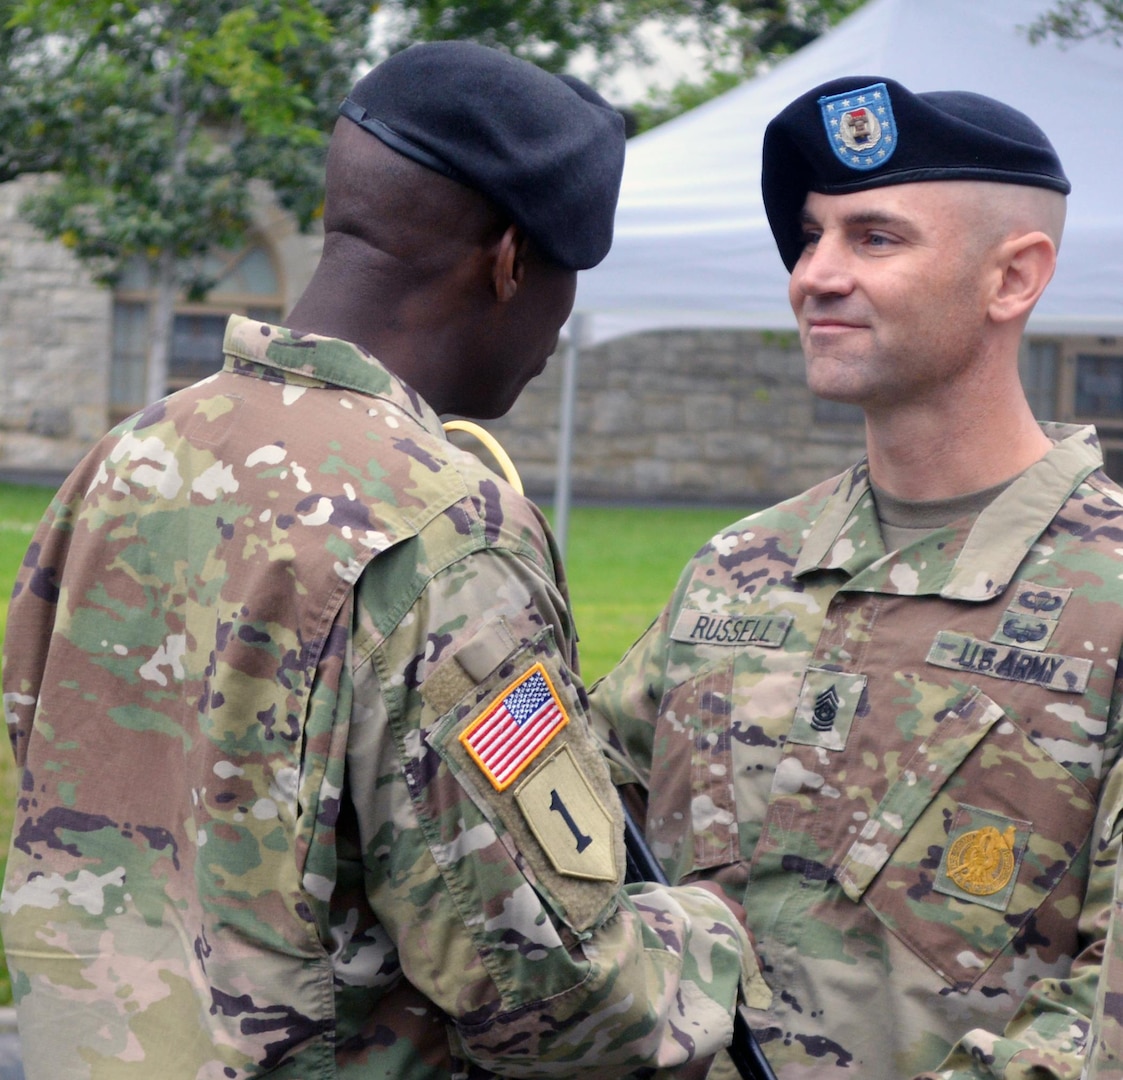 Command Sgt. Maj. Craig Russell (right) accepts the NCO sword from Col. Terance Huston (left), 5th Recruiting Brigade commander, during the brigade’s change of responsibility ceremony March 24 at the historic quadrangle on JBSA-Fort Sam Houston, signifying his acceptance of the command sergeant major position for the Brigade.  